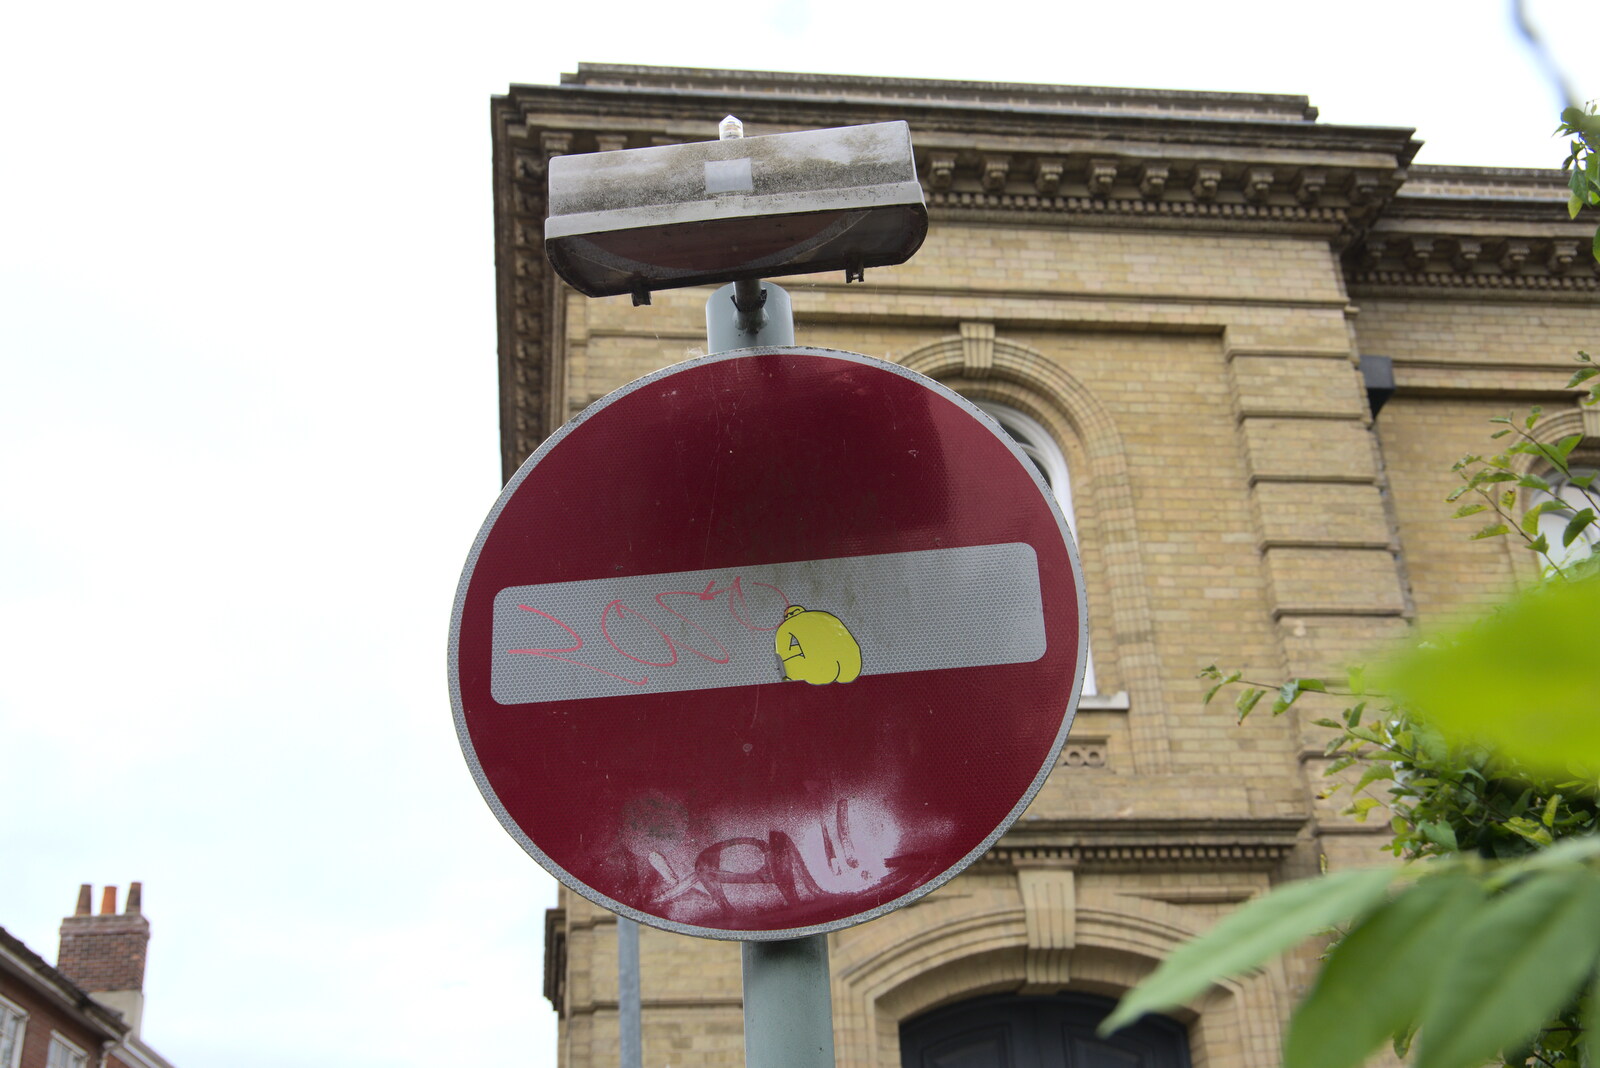 Amusingly-altered no entry sign from Dippy and the City Dinosaur Trail, Norwich, Norfolk - 19th August 2021